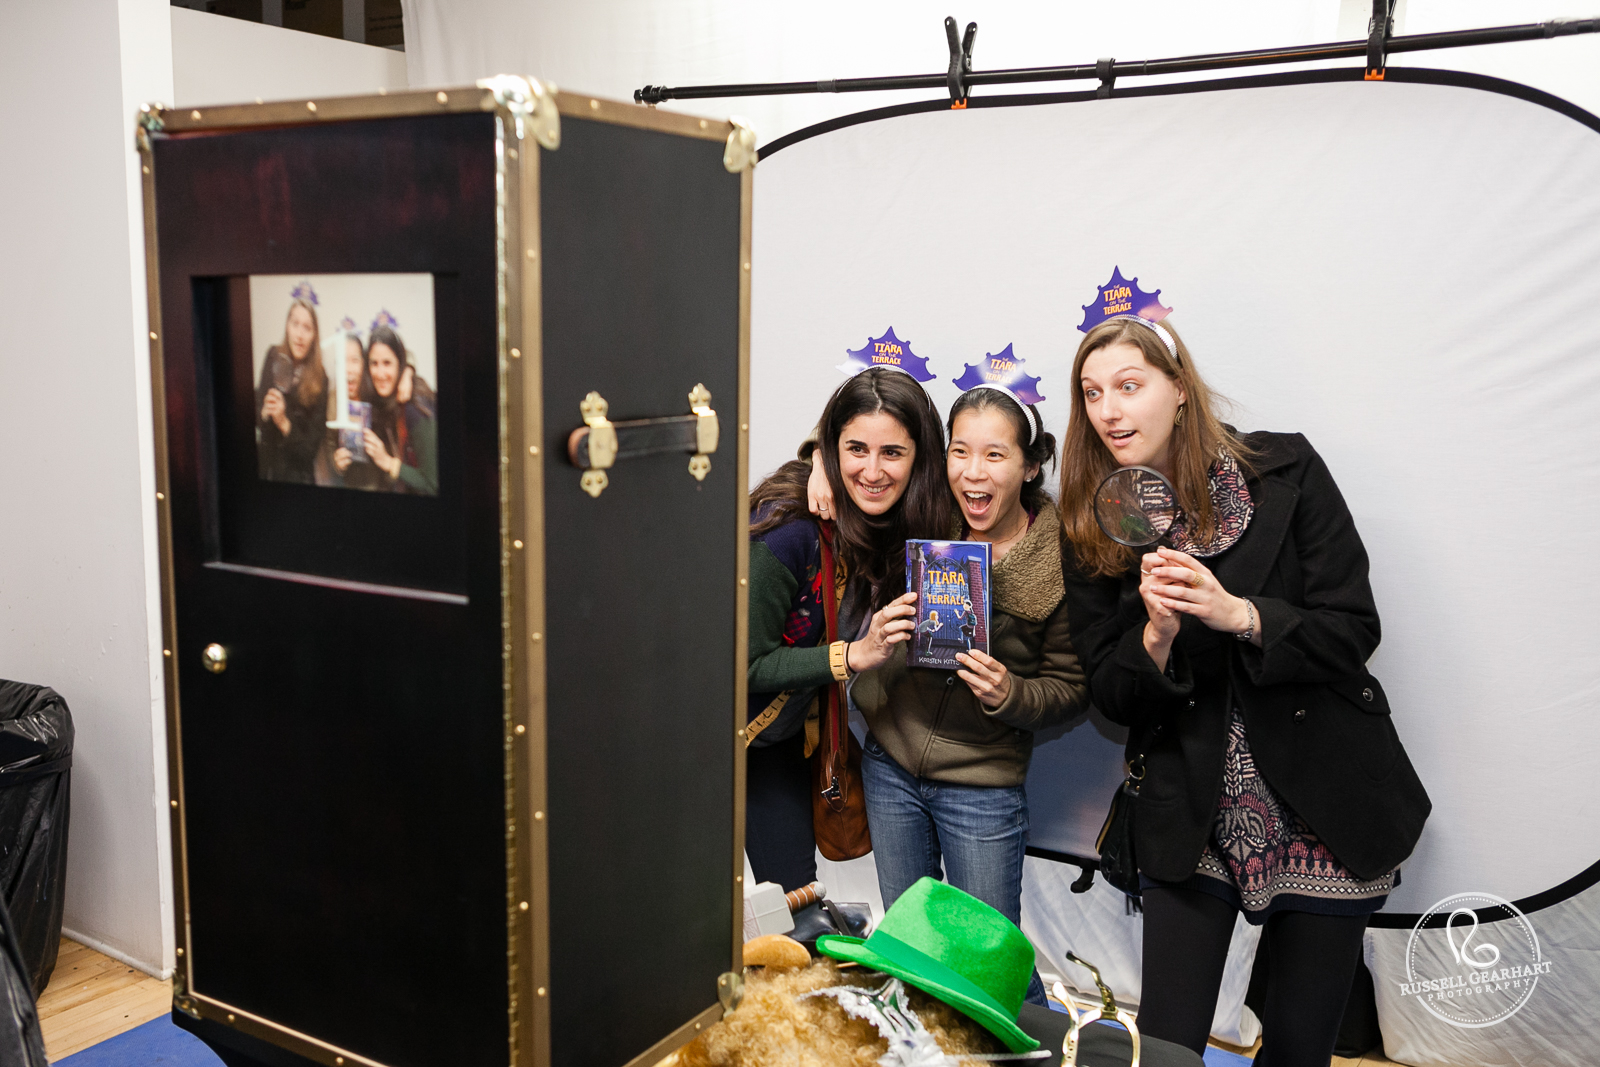 Photobooth at the Tiara on the Terrace book launch at Pasadena Armory Center for the Arts - Photo by Russell Gearhart Photography